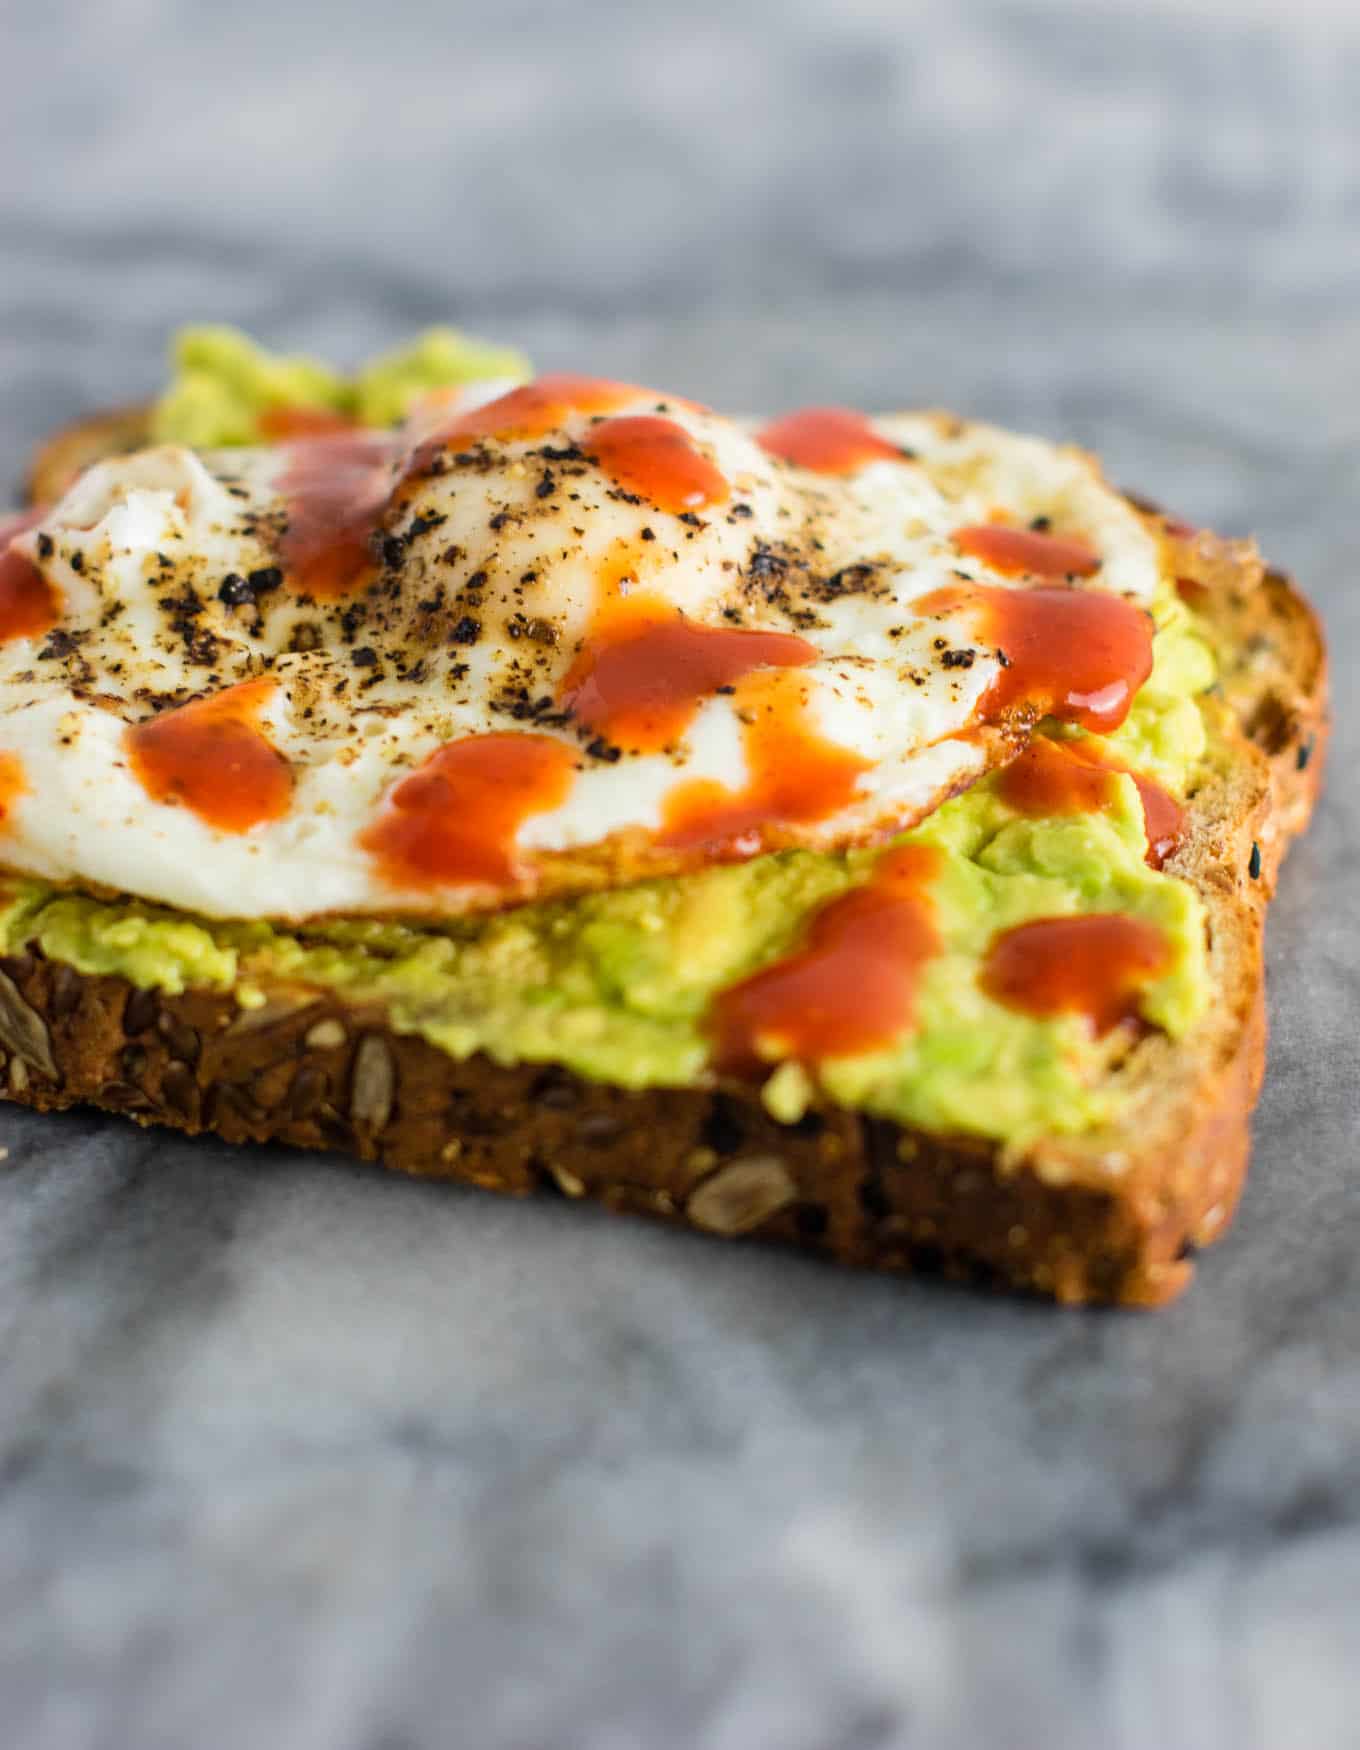 Spicy Avocado Egg Toast - really easy but so delicious. I make this all the time! #breakfast #avocadotoast #eggs #vegetarian #meatless